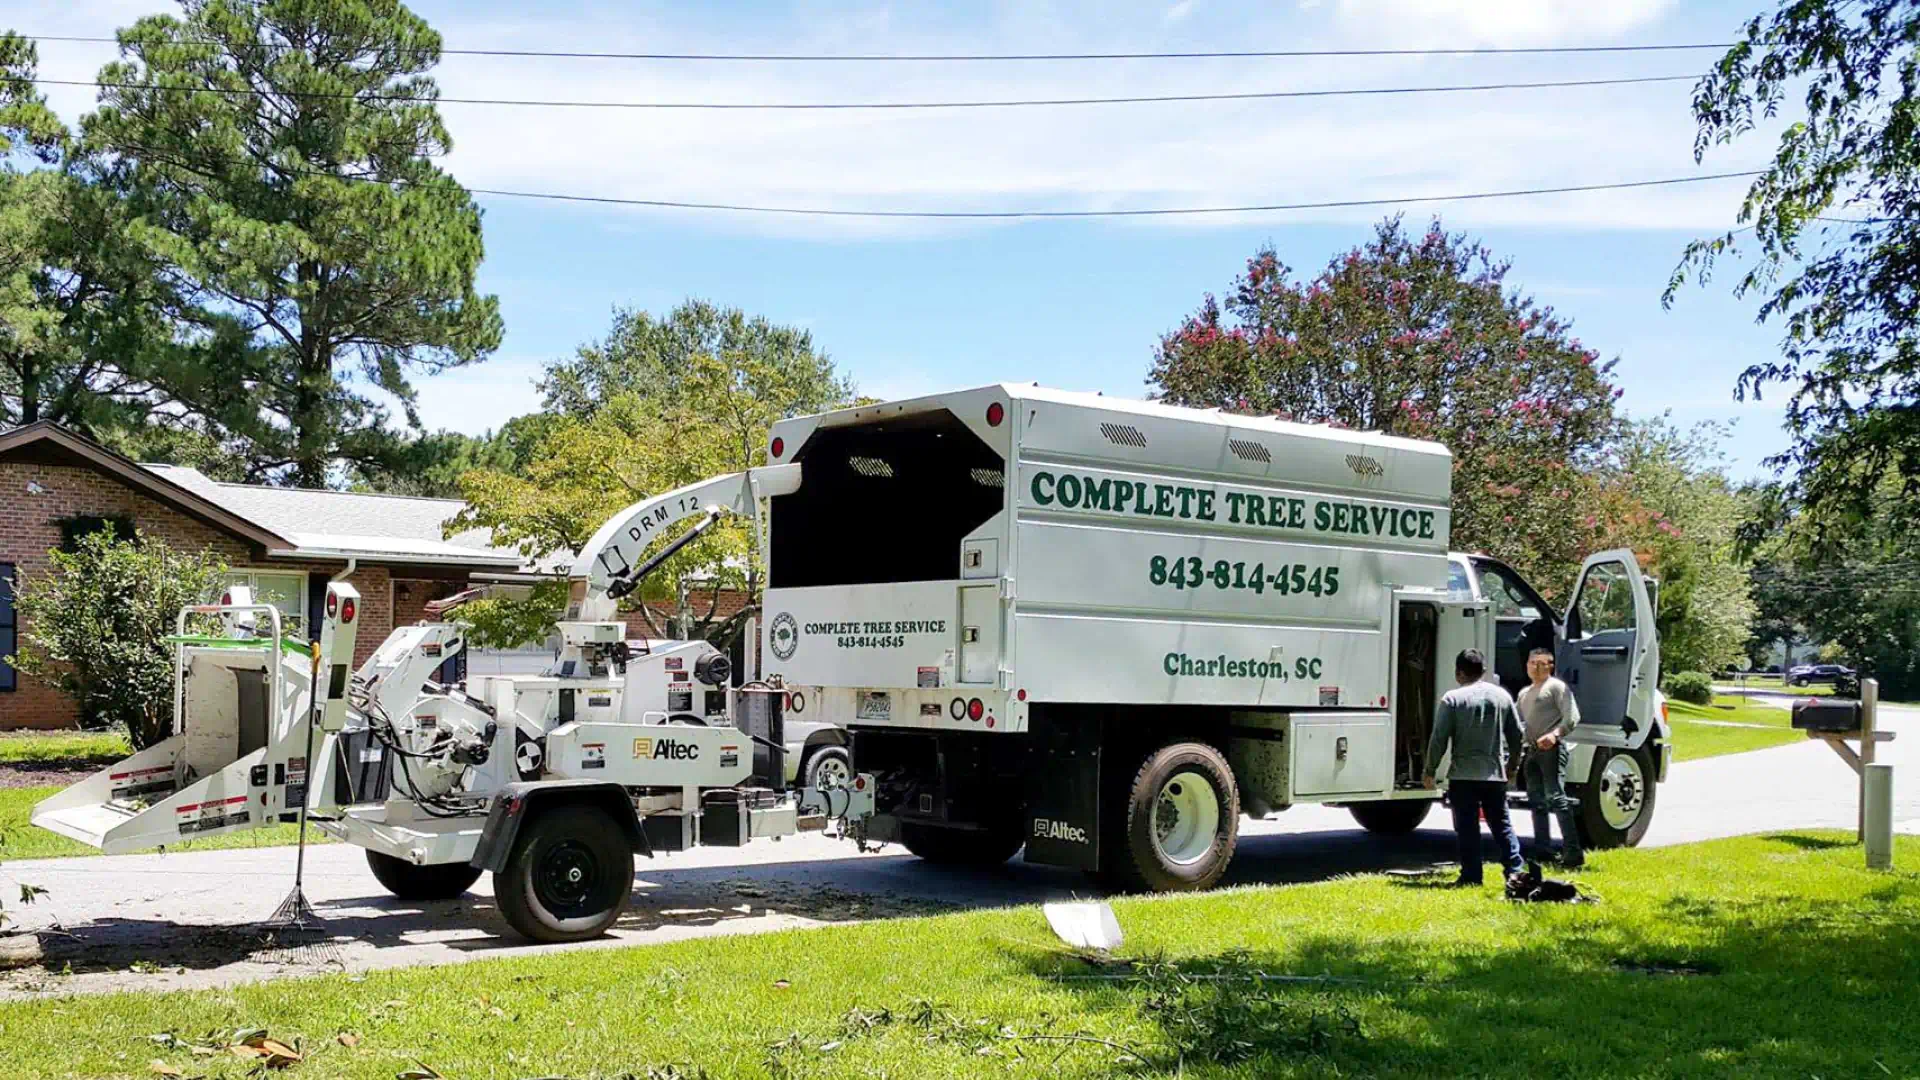 complete tree service truck ready for service